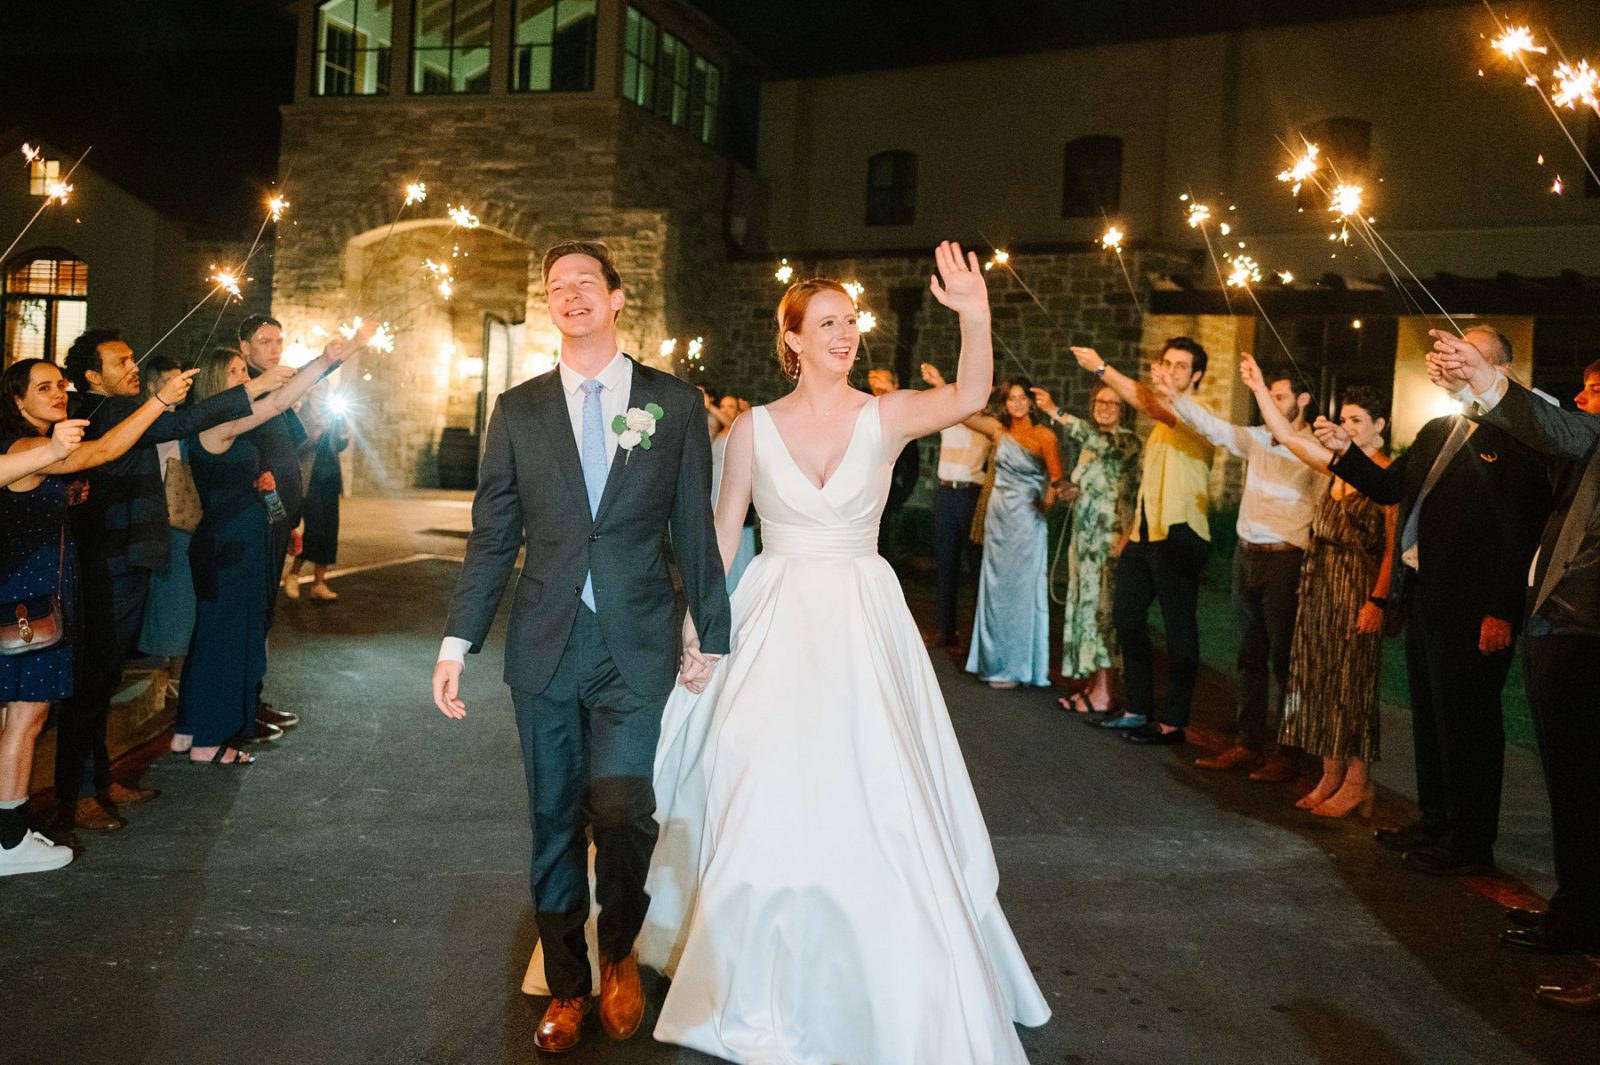 sparkler exit, sparkler exit at canyonwood ridge, bride and groom grand exit, reception at canyonwood ridge, canyonwood ridge reception photos, canyonwood ridge, canyonwood ridge wedding, dripping springs wedding venue, austin wedding, austin wedding photography, tara lyons photography